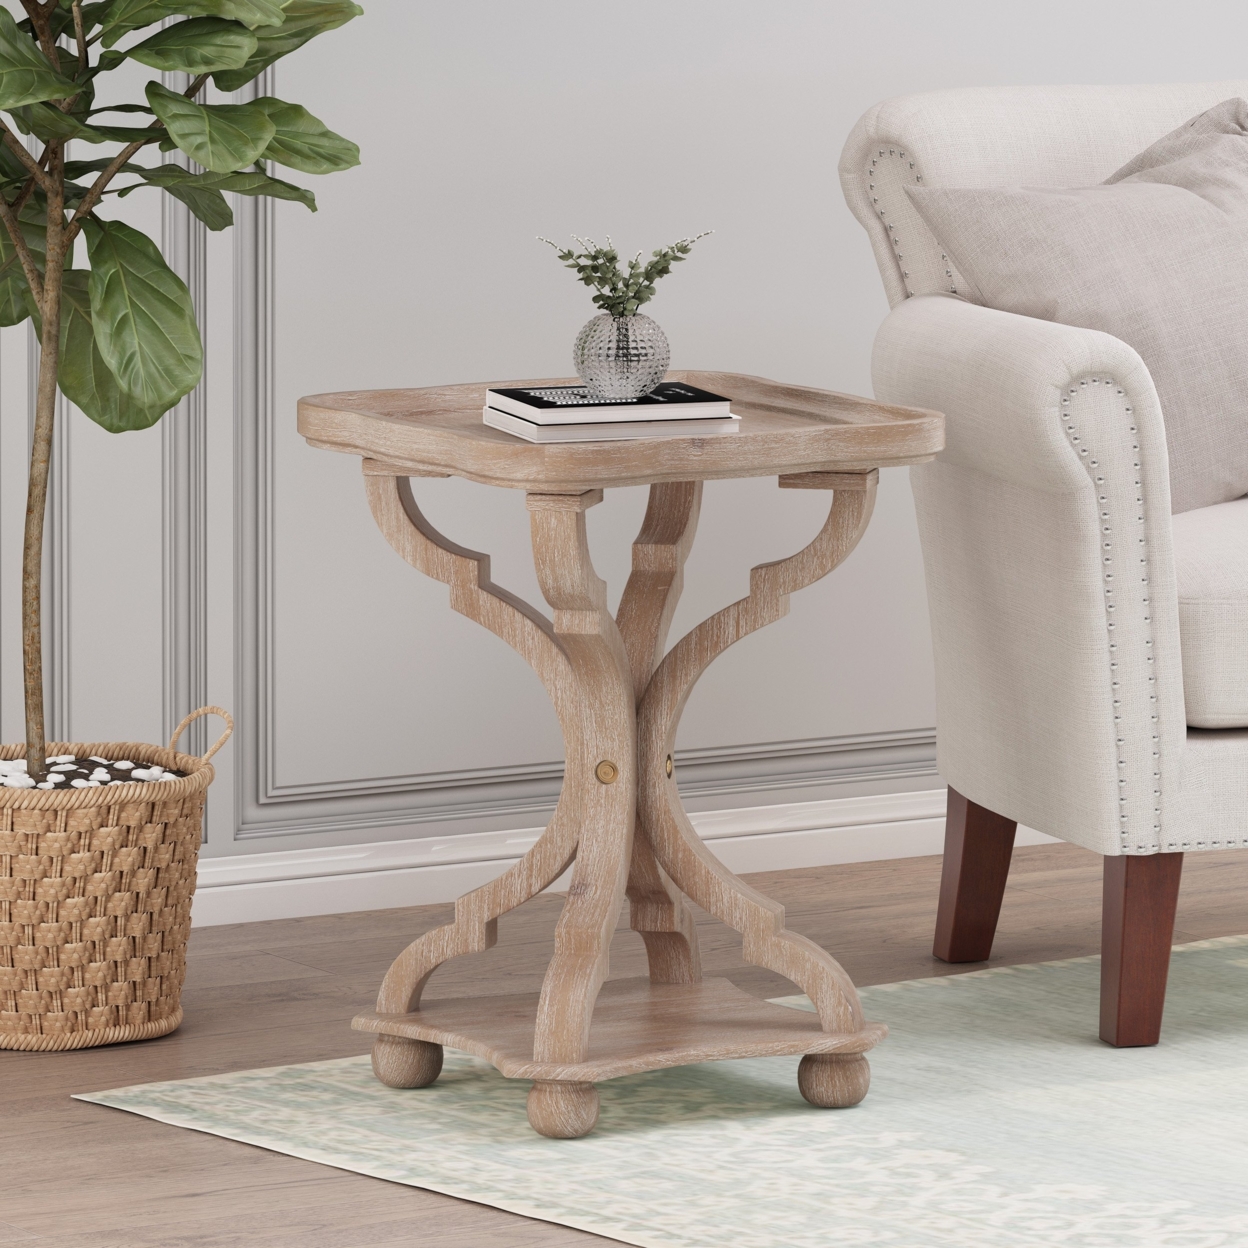 Dianelly French Country Accent Table With Square Top - Natural